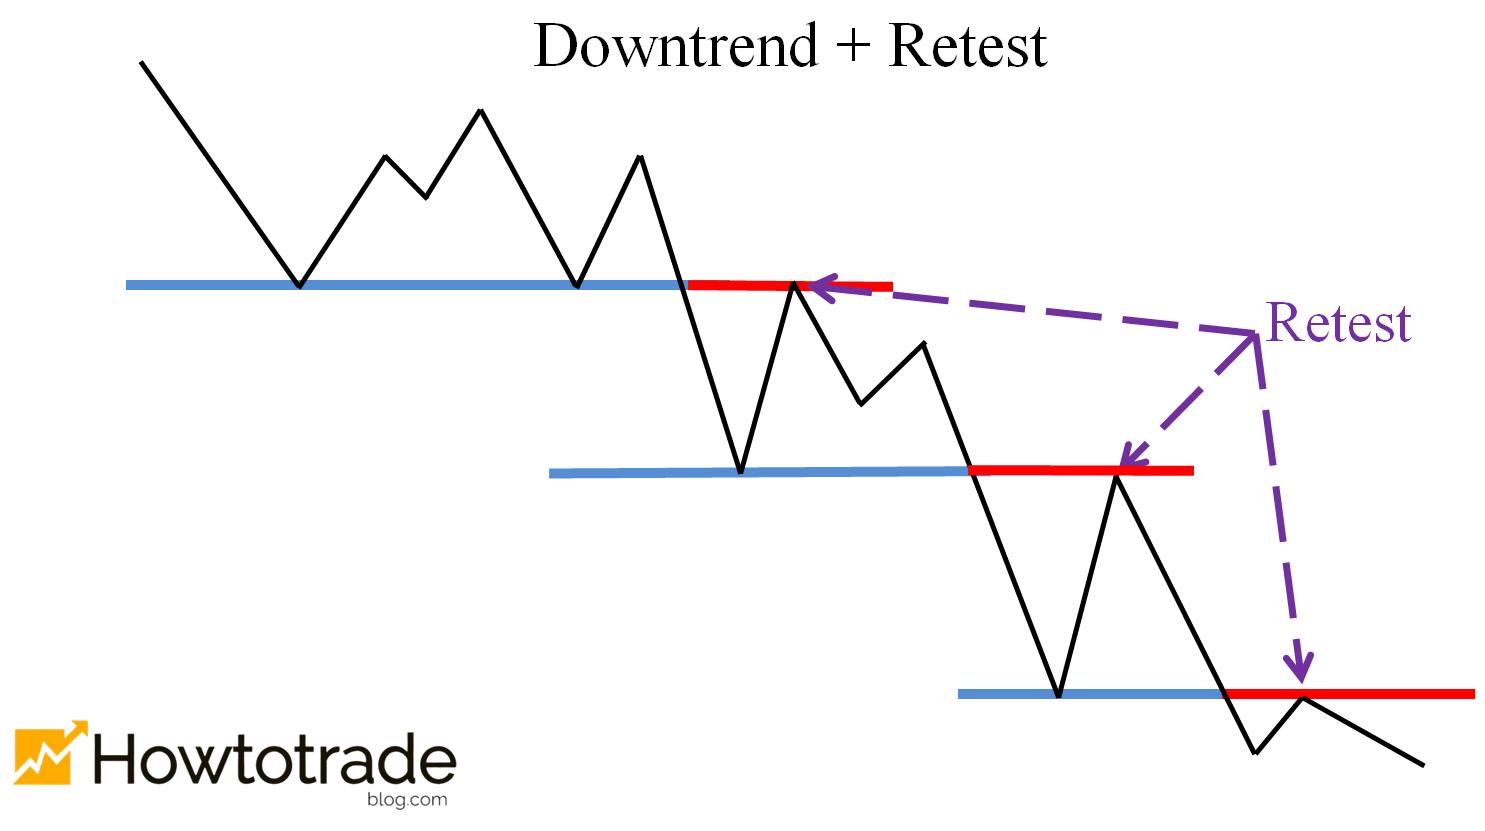 The price retests the levels in a downtrend